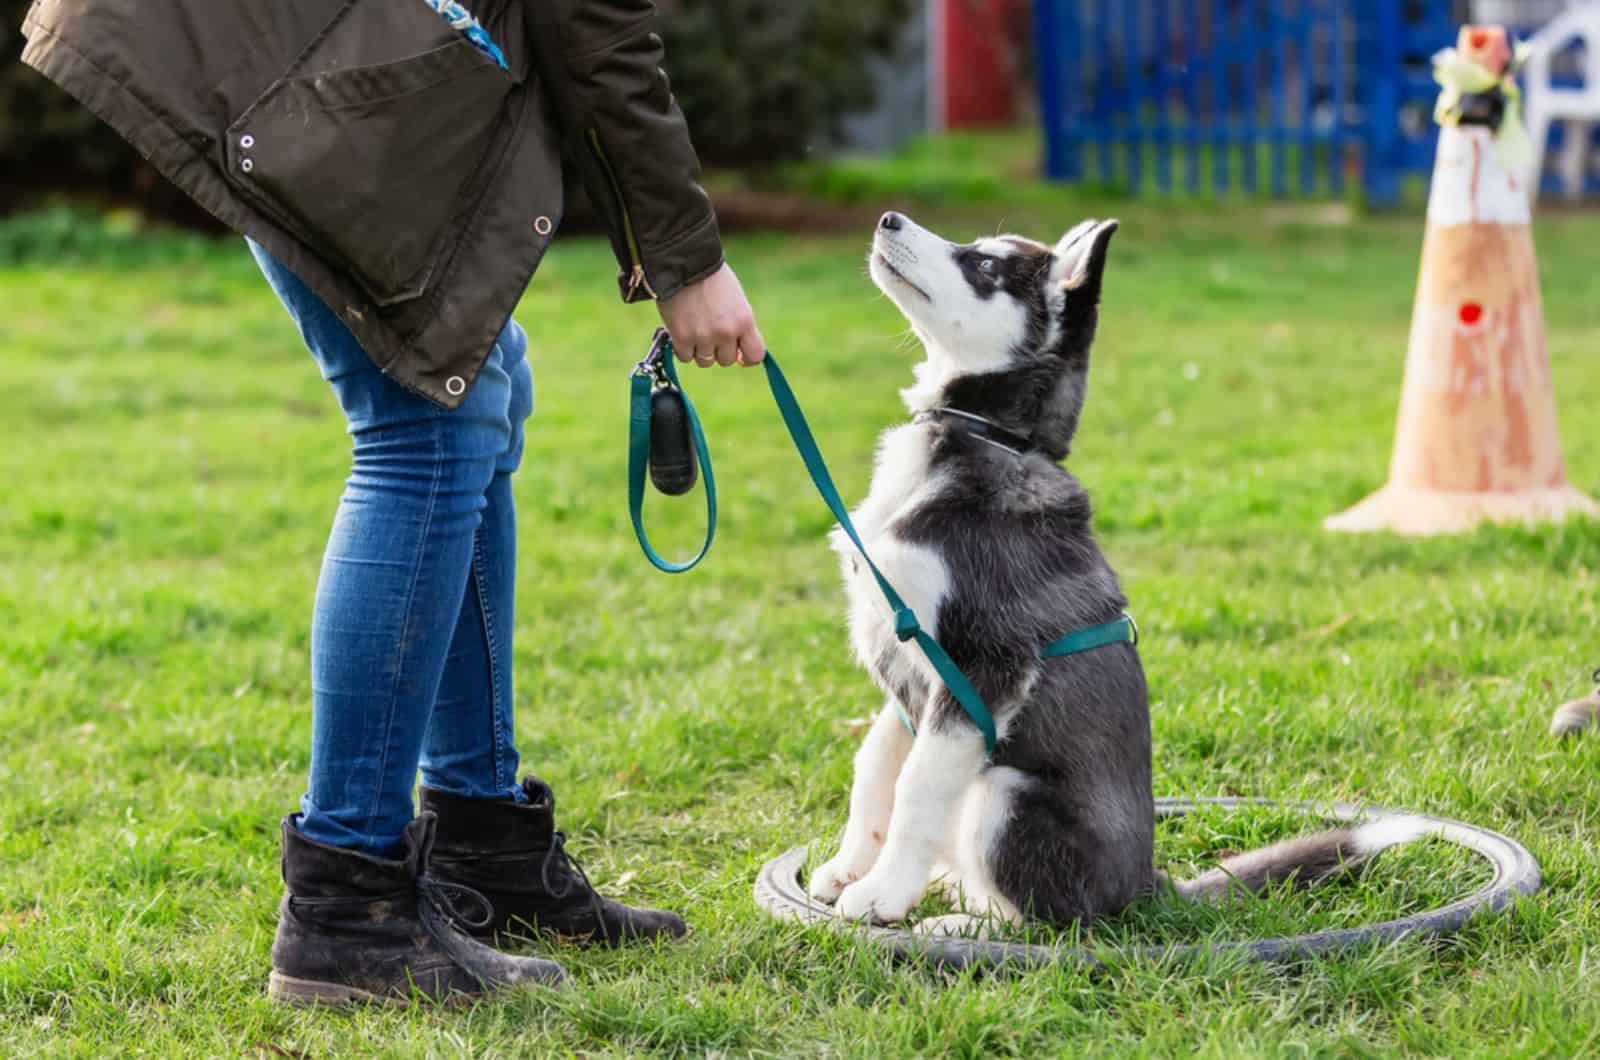 13 Dog Breeds That Don’t Really Like To Go Through Dog Training